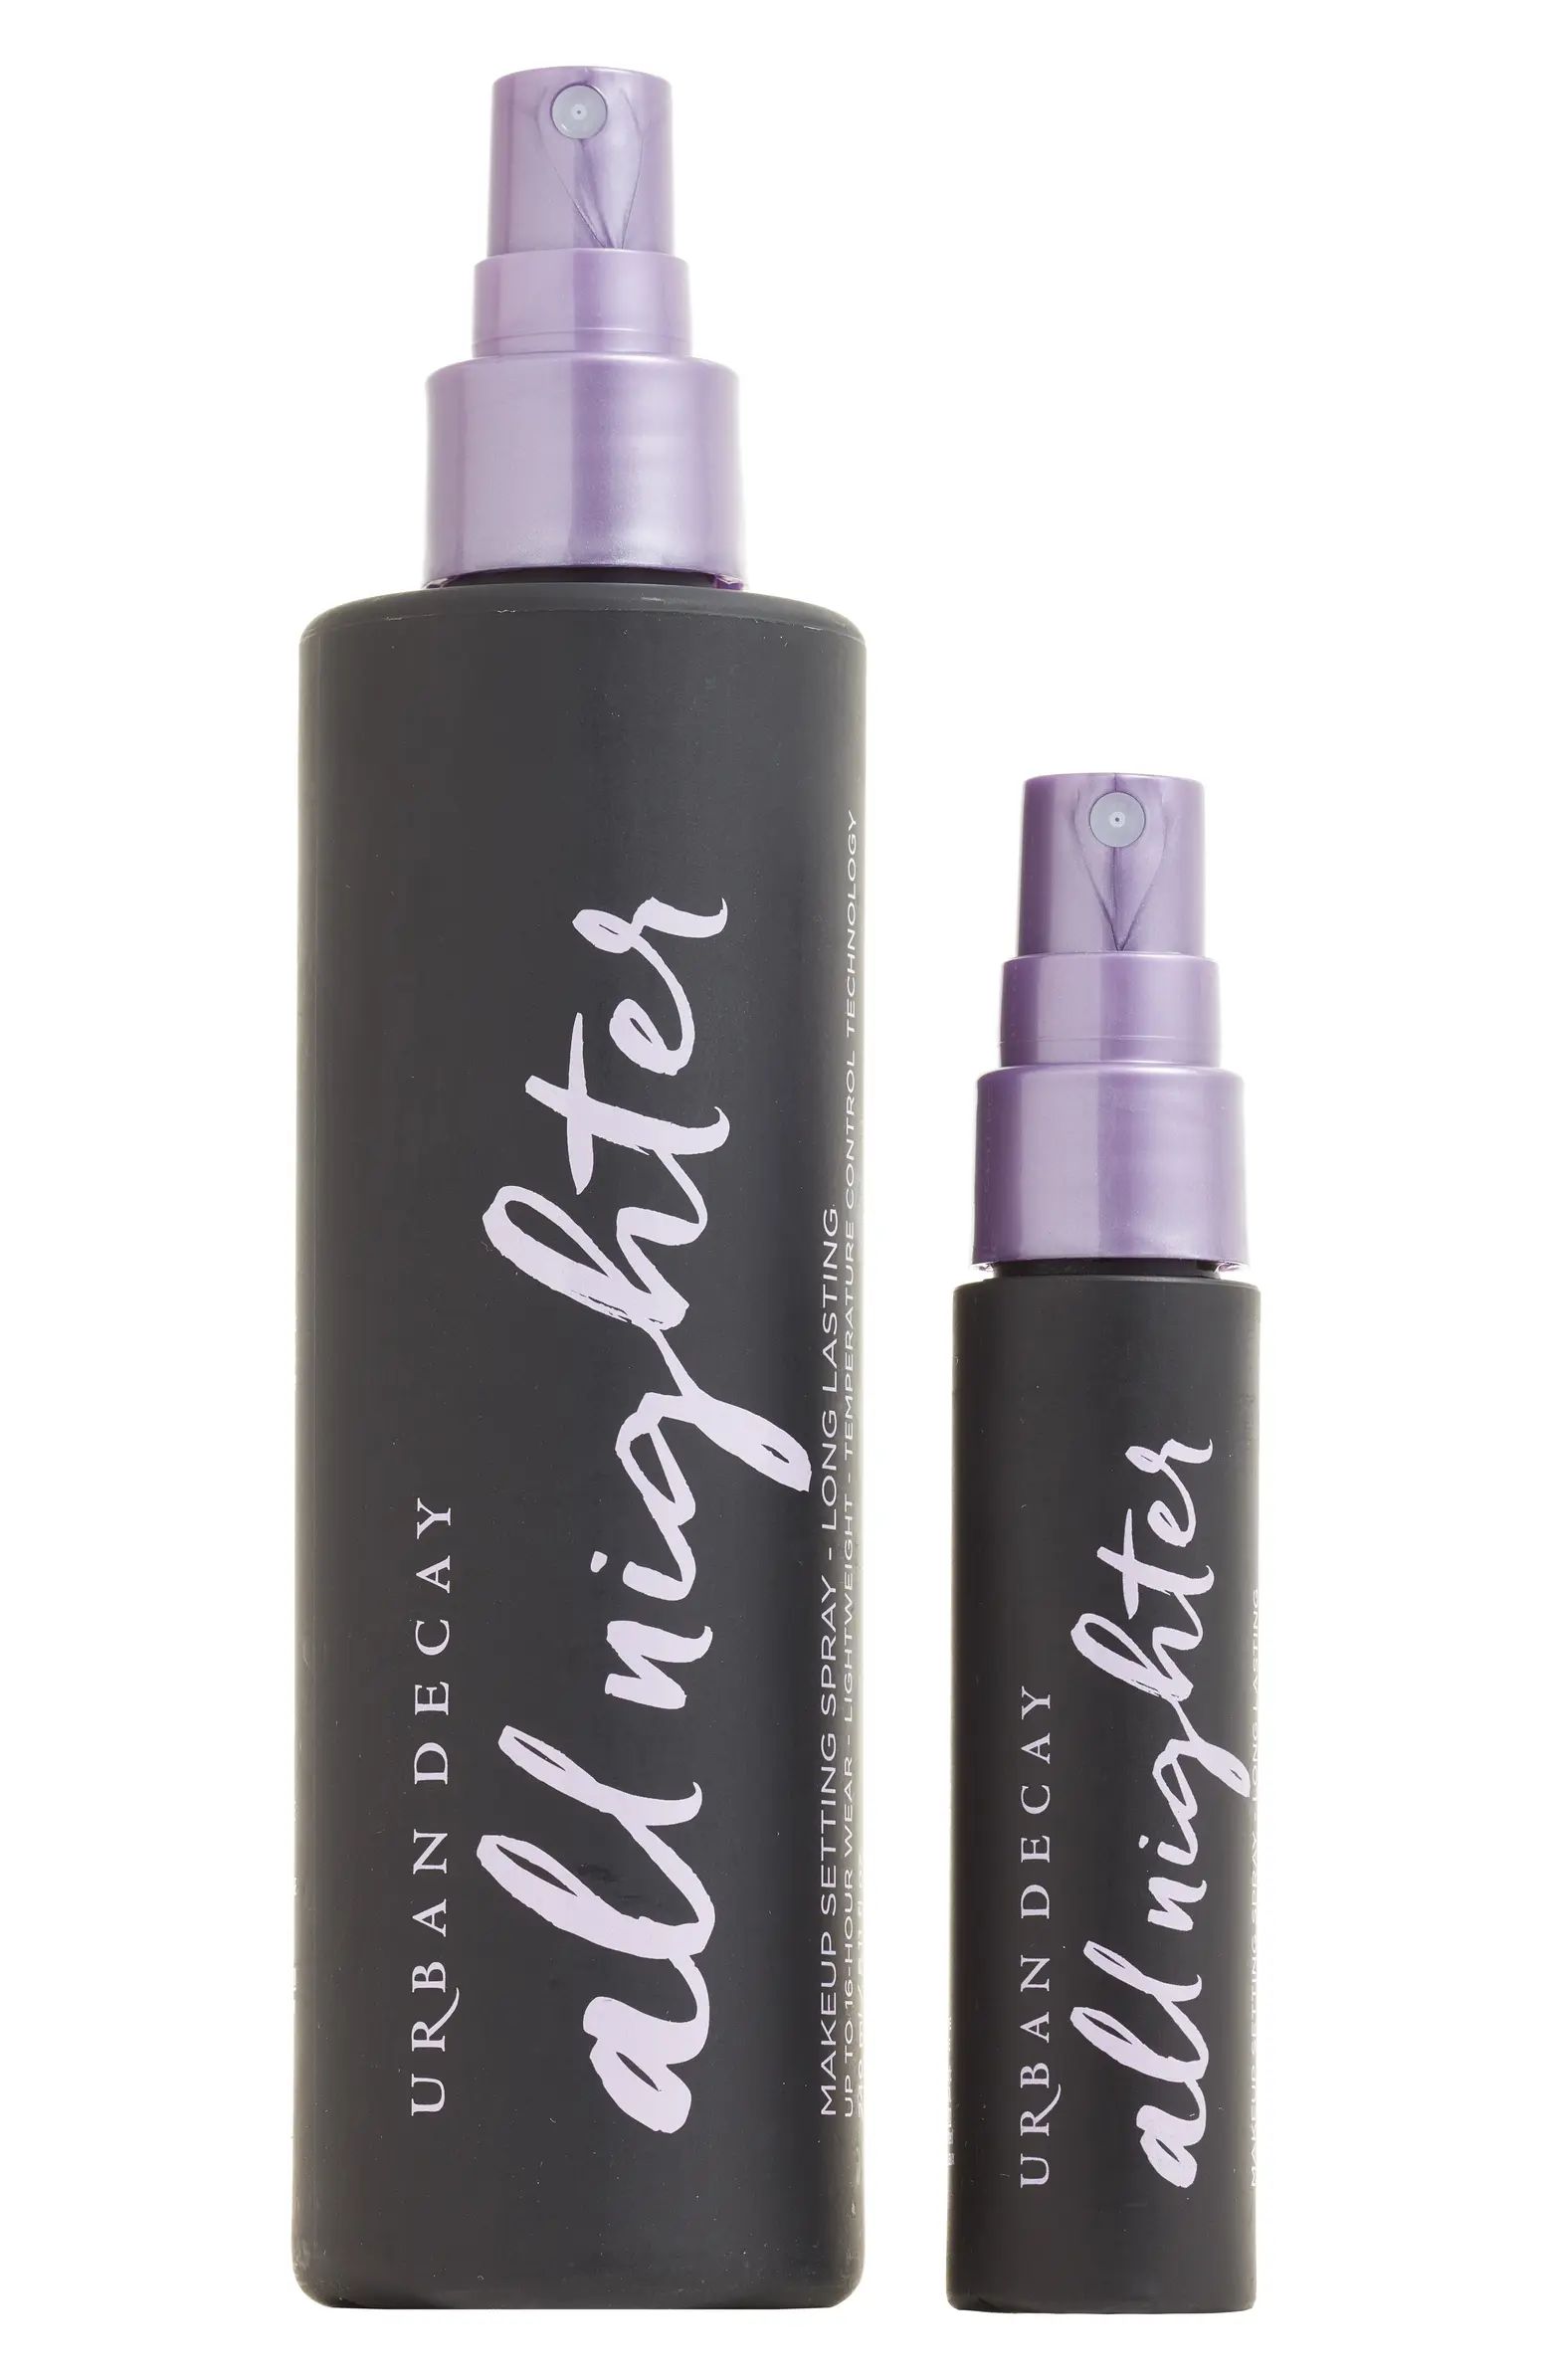 All Nighter Long-Lasting Makeup Setting Spray Duo | Nordstrom